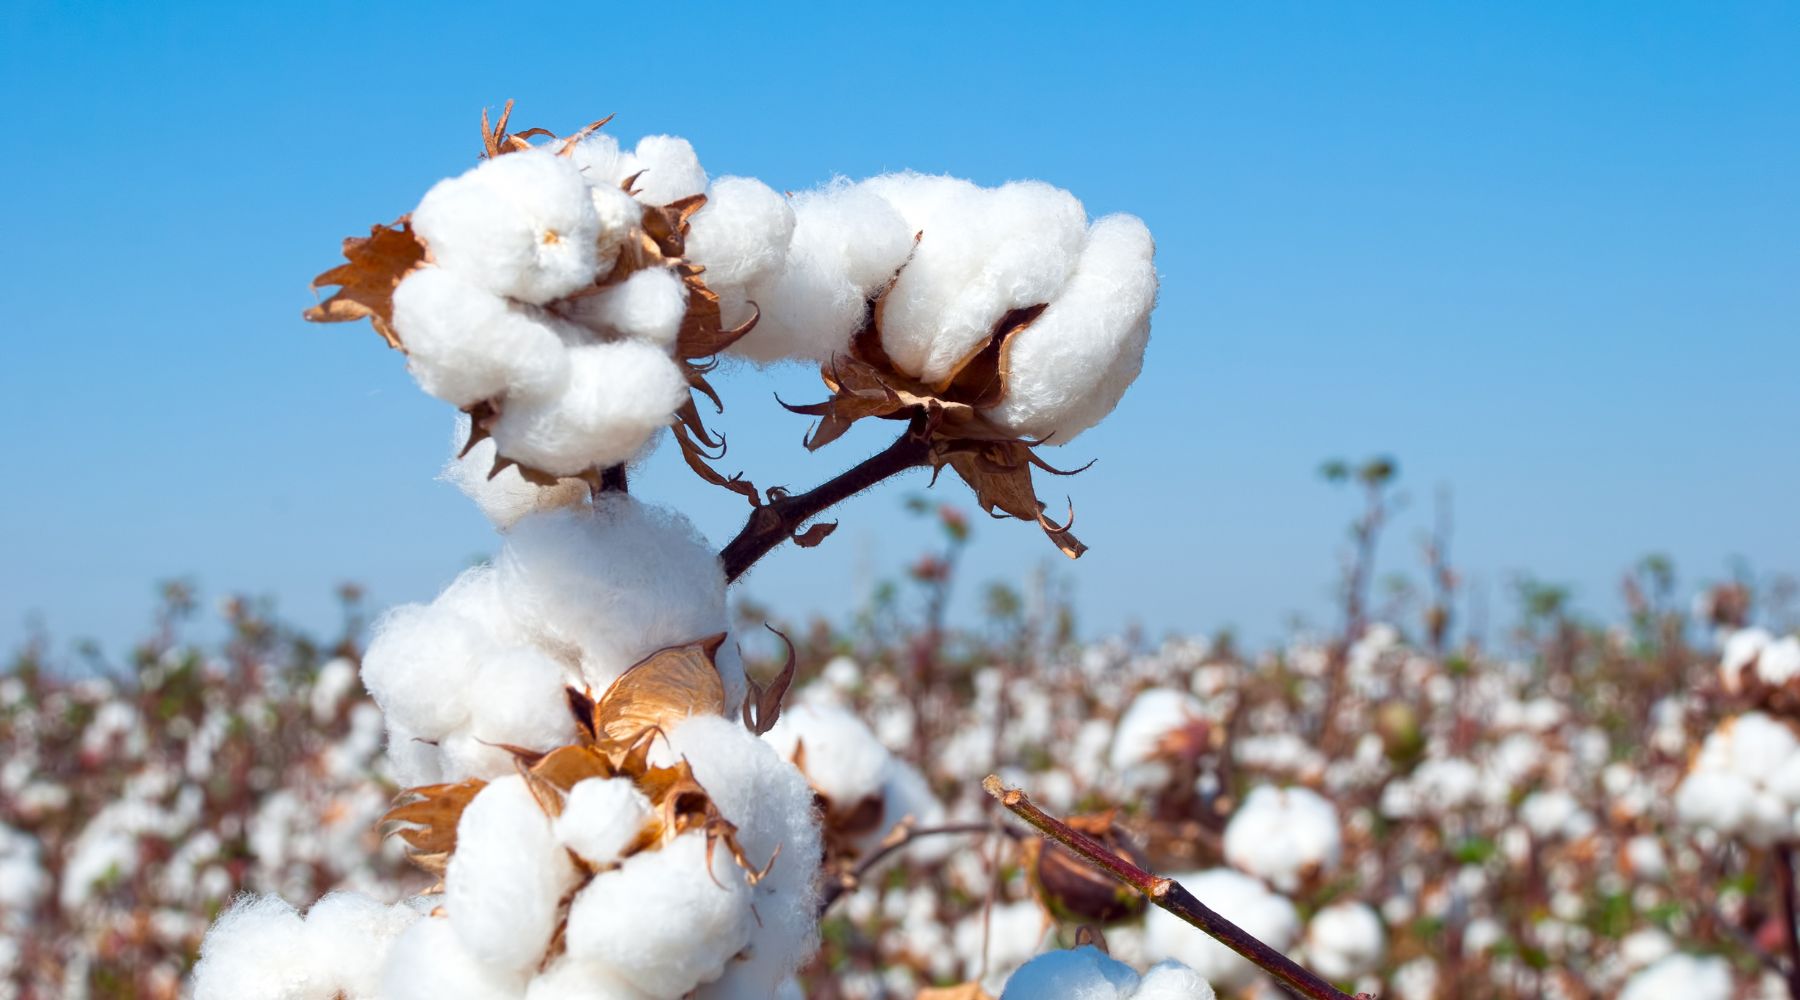 history of cotton